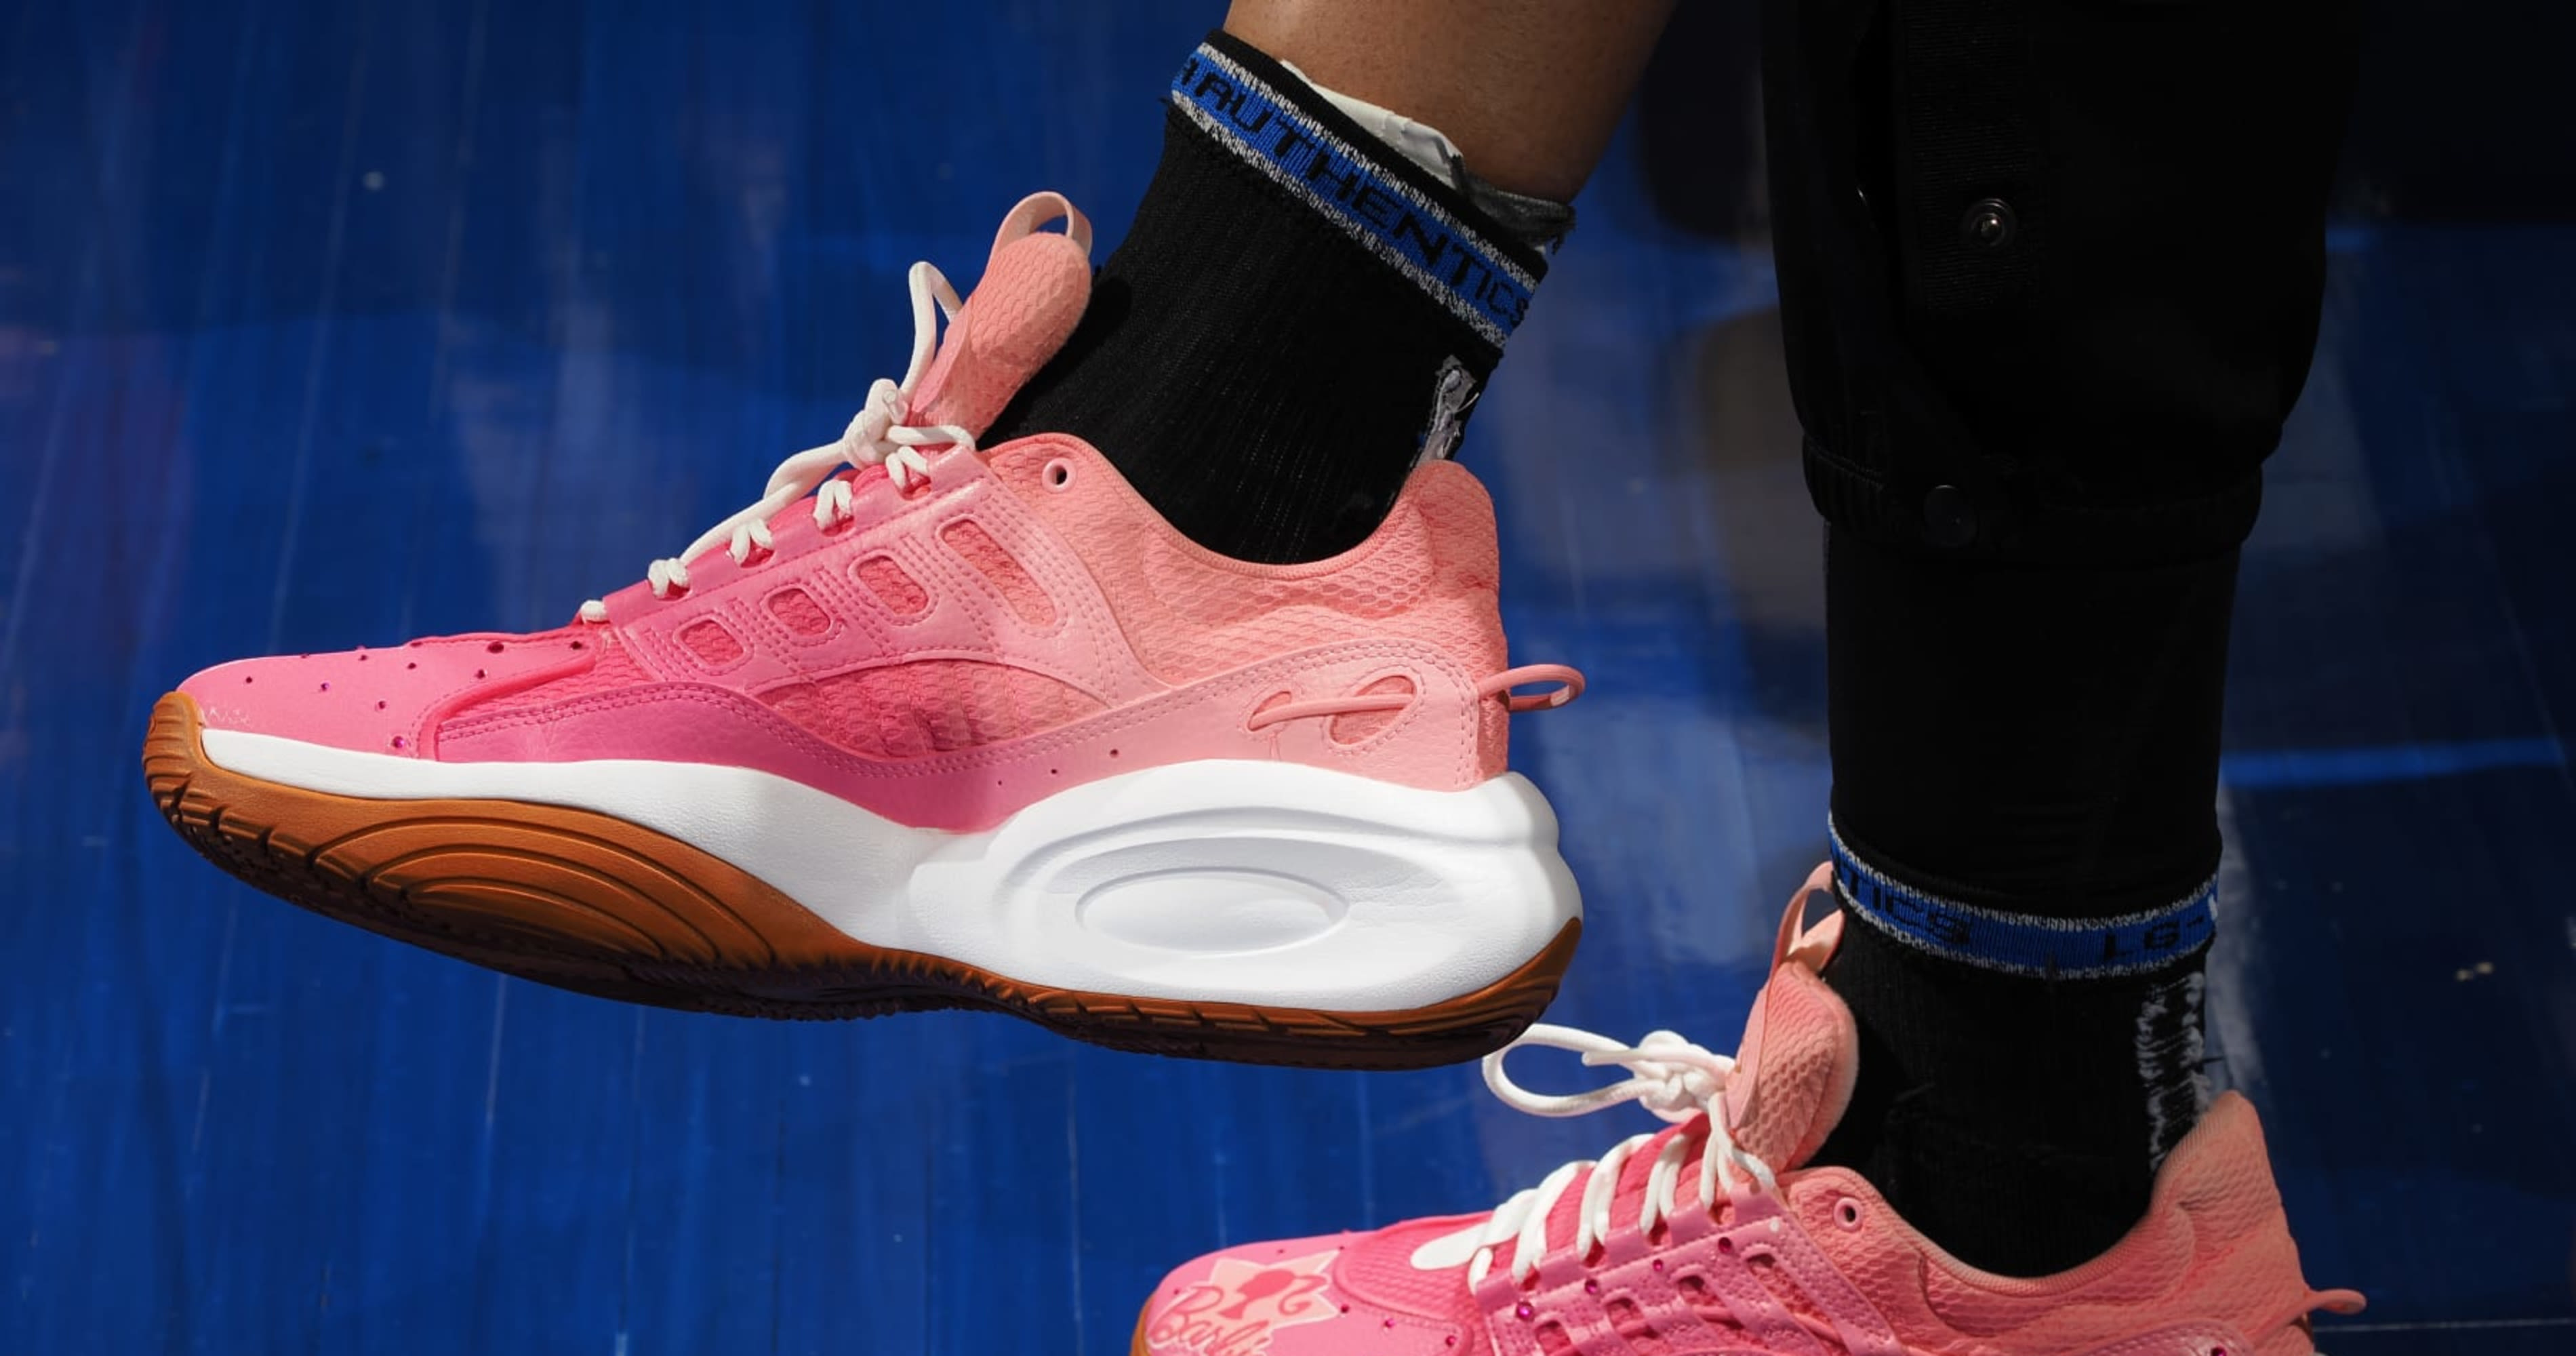 Video: WNBA's Angel Reese Shows Off 'Barbie' Shoes, Calls Herself 'High Fashion'